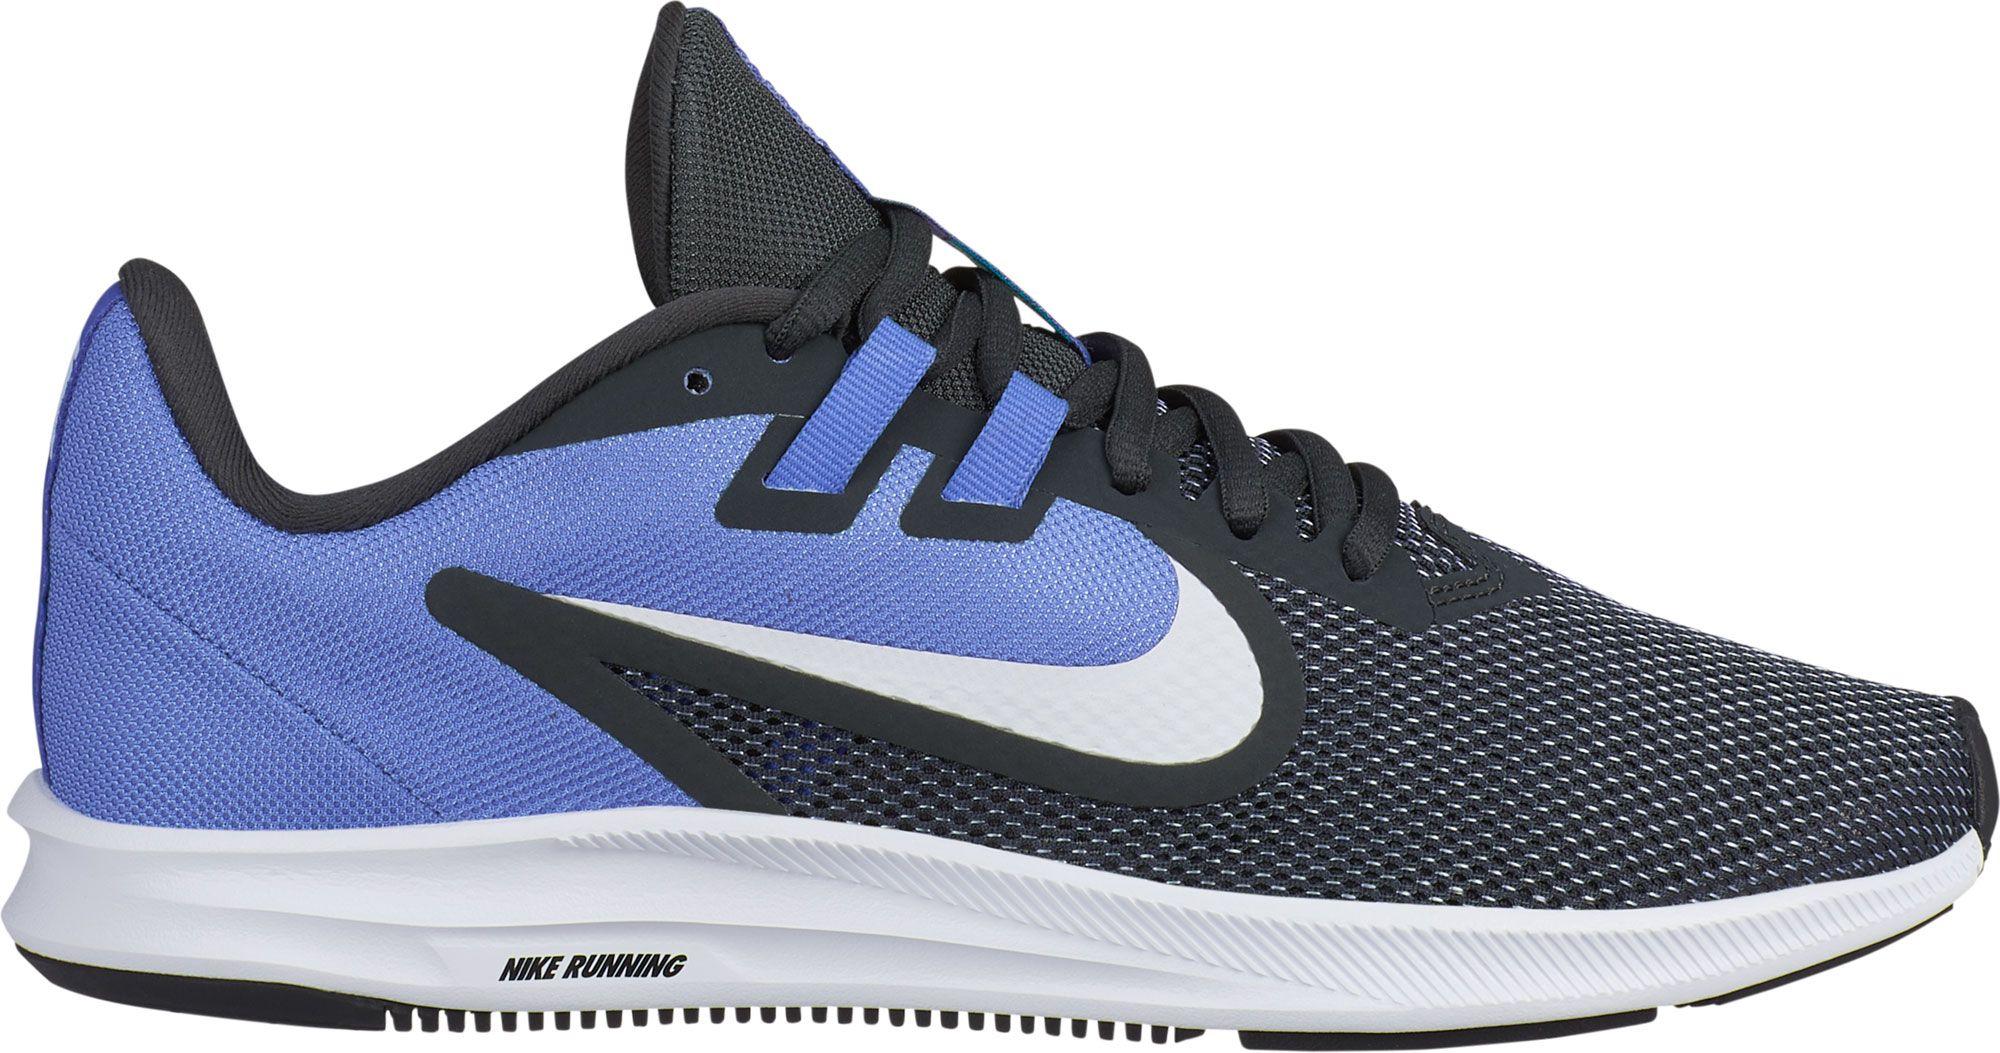 Nike Rubber Downshifter 9 Running Shoes in Grey/Blue (Gray) - Lyst